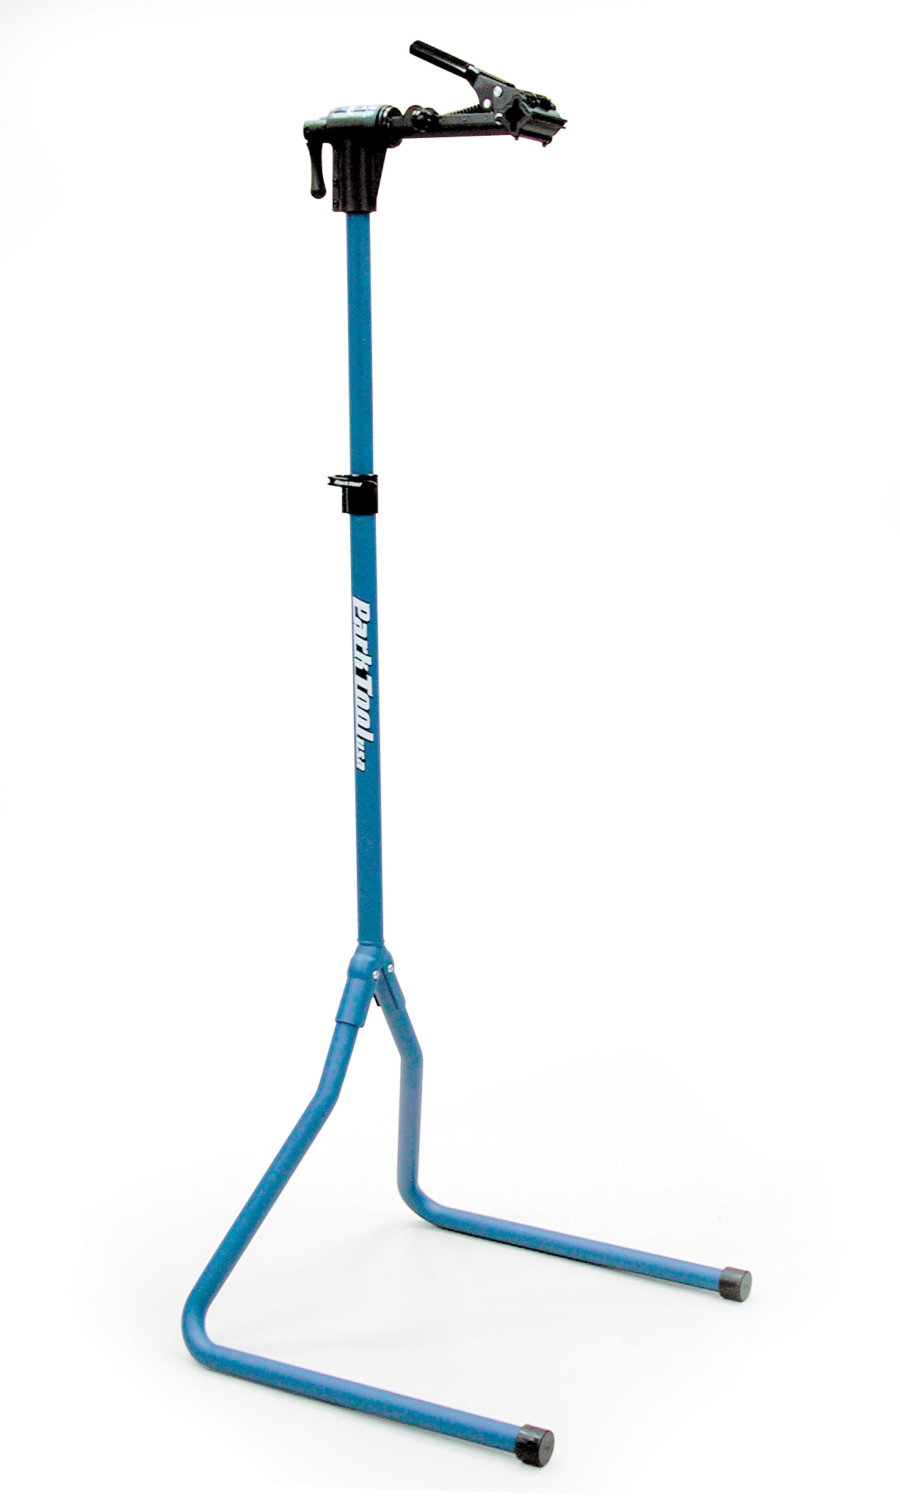 The Park Tool PCS-1 Home Mechanic Repair Stand, enlarged